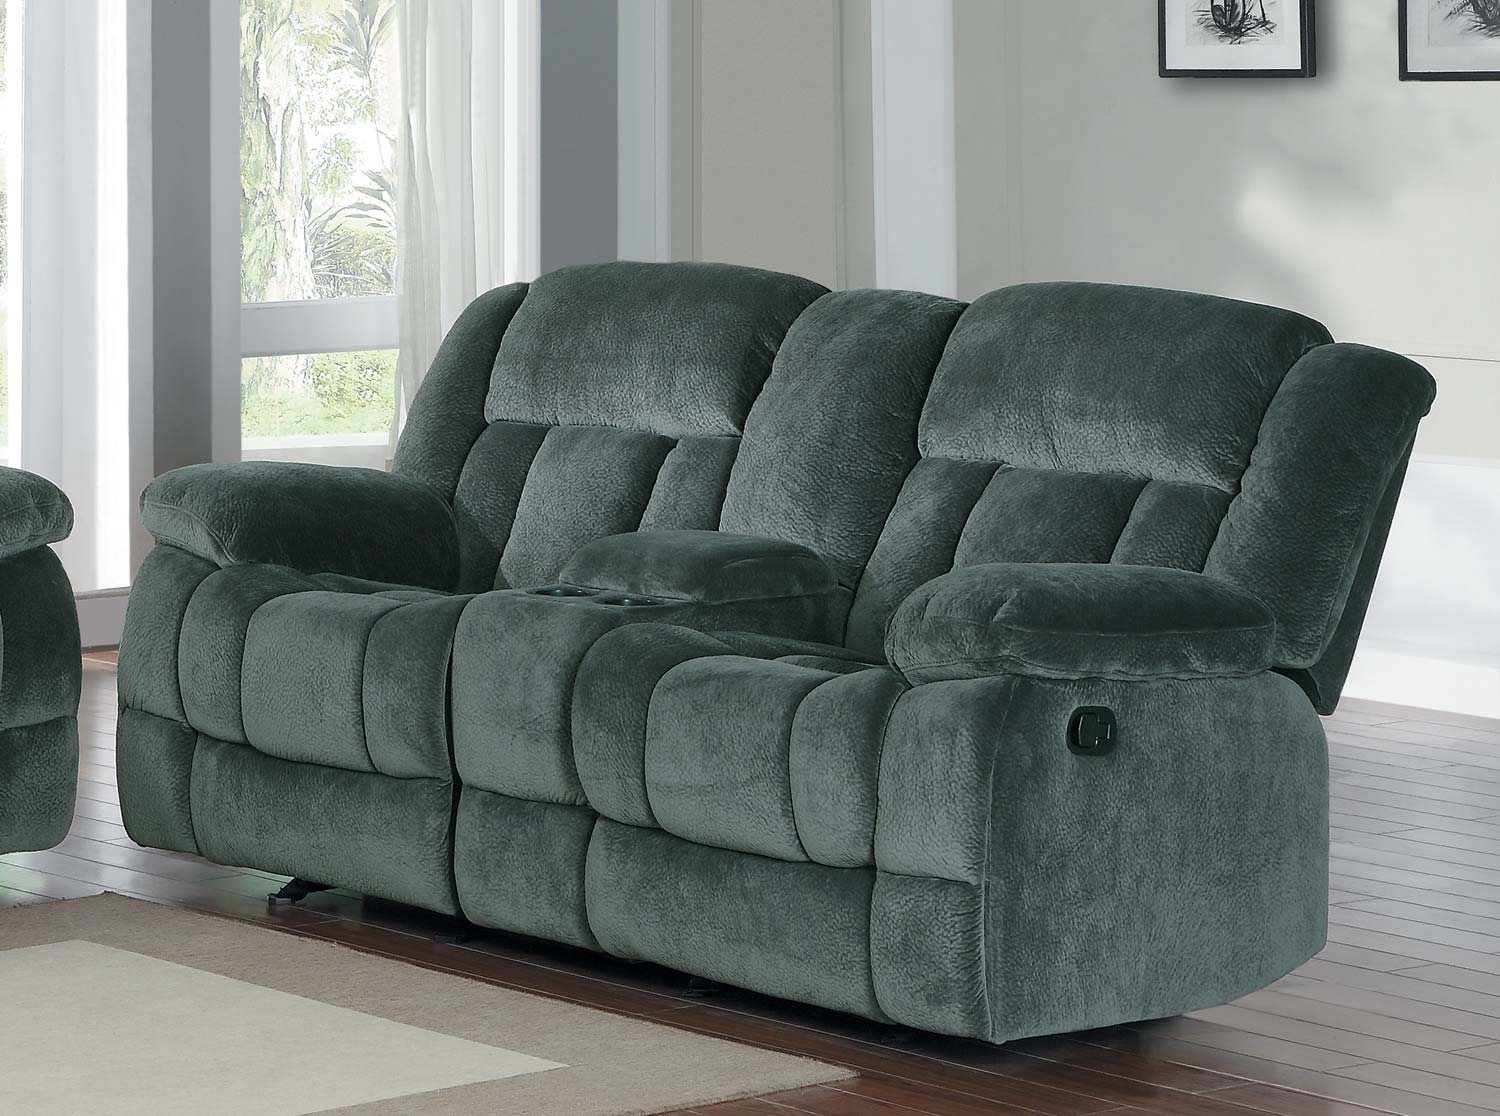 Homelegance Laurelton Double Glider Reclining Love Seat with Center Console - Charcoal - Textured Plush Microfiber